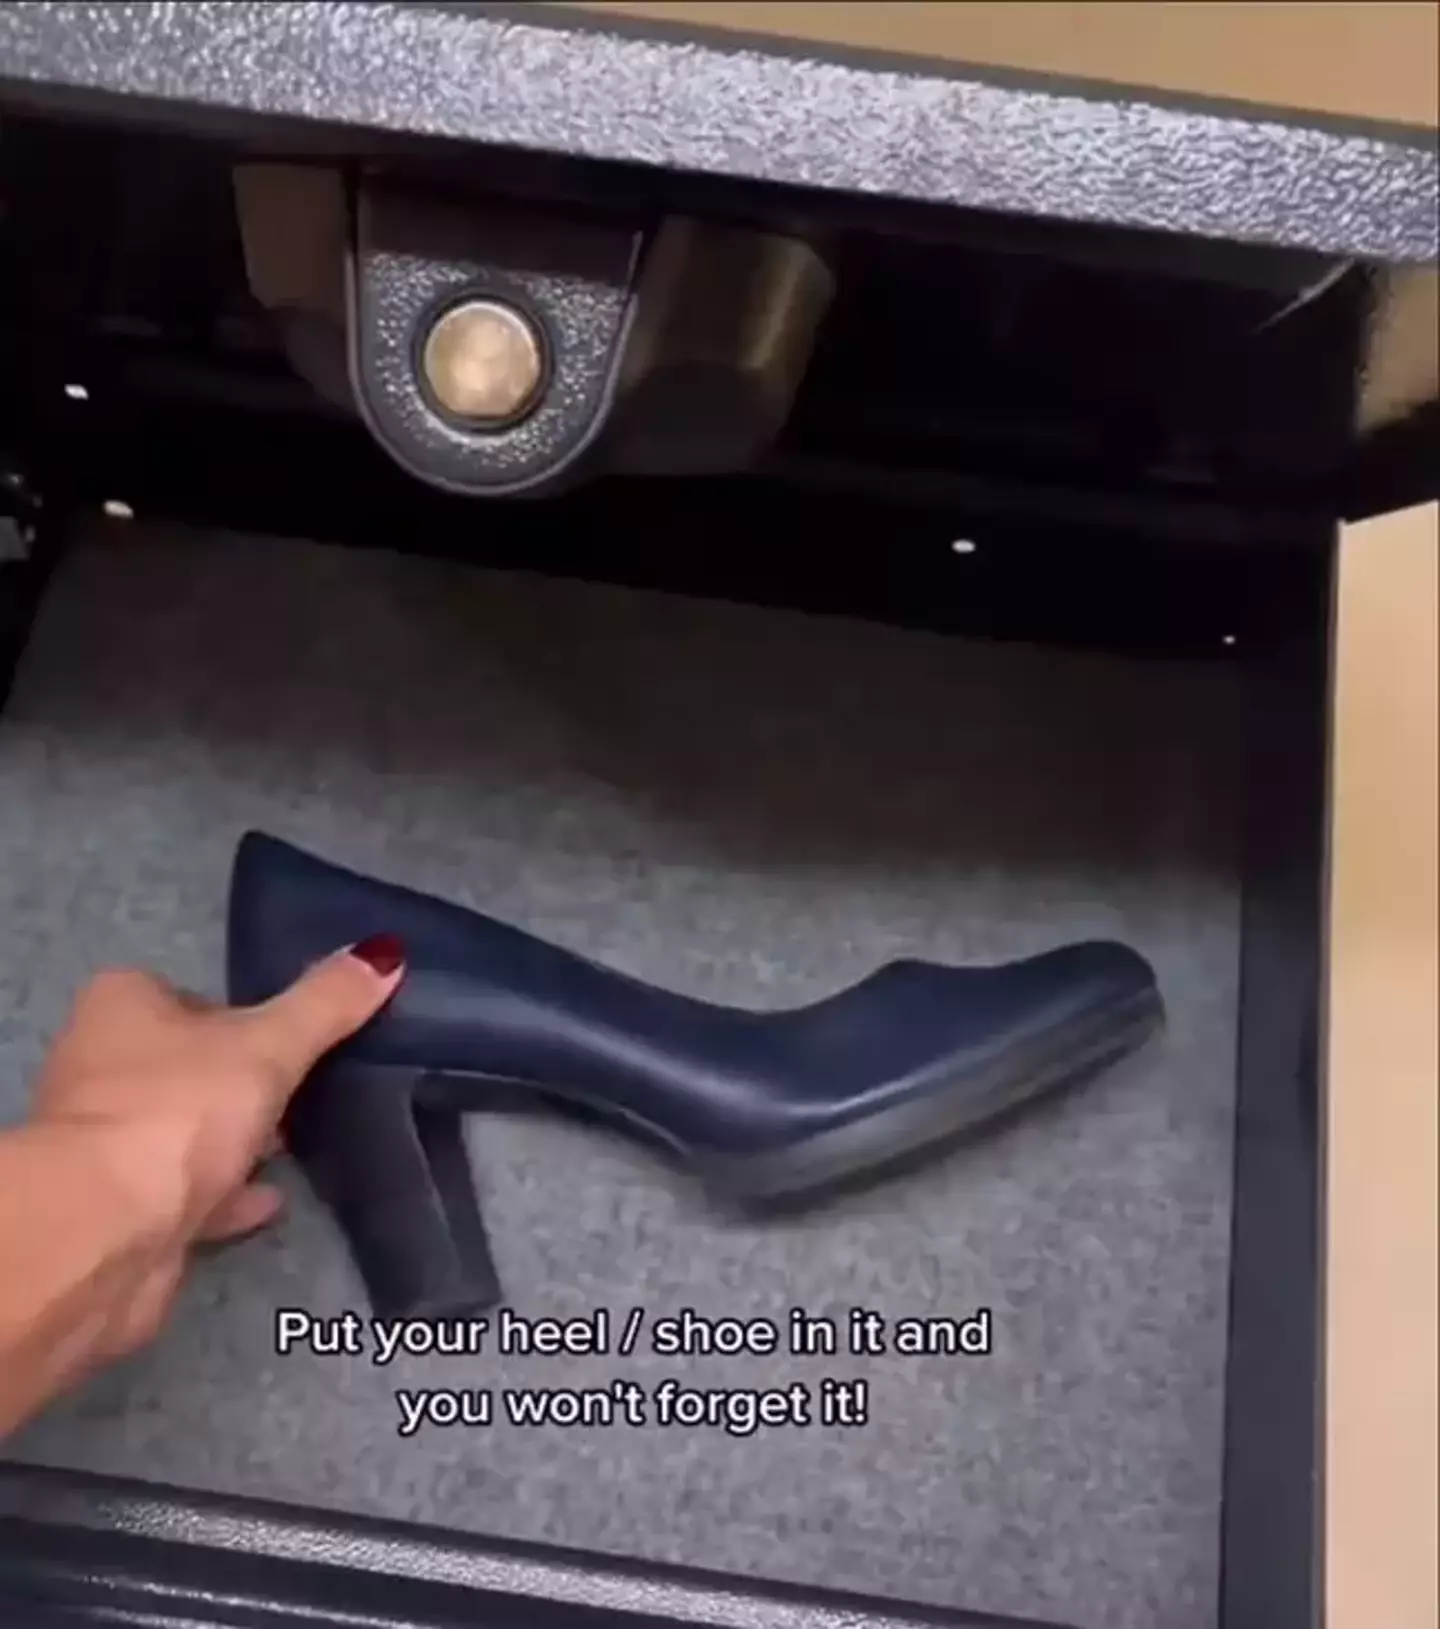 Elsewhere in 'hotel hacks from flight attendants featuring a shoe' is the advice to put a shoe in your safe so you don't forget anything in there.